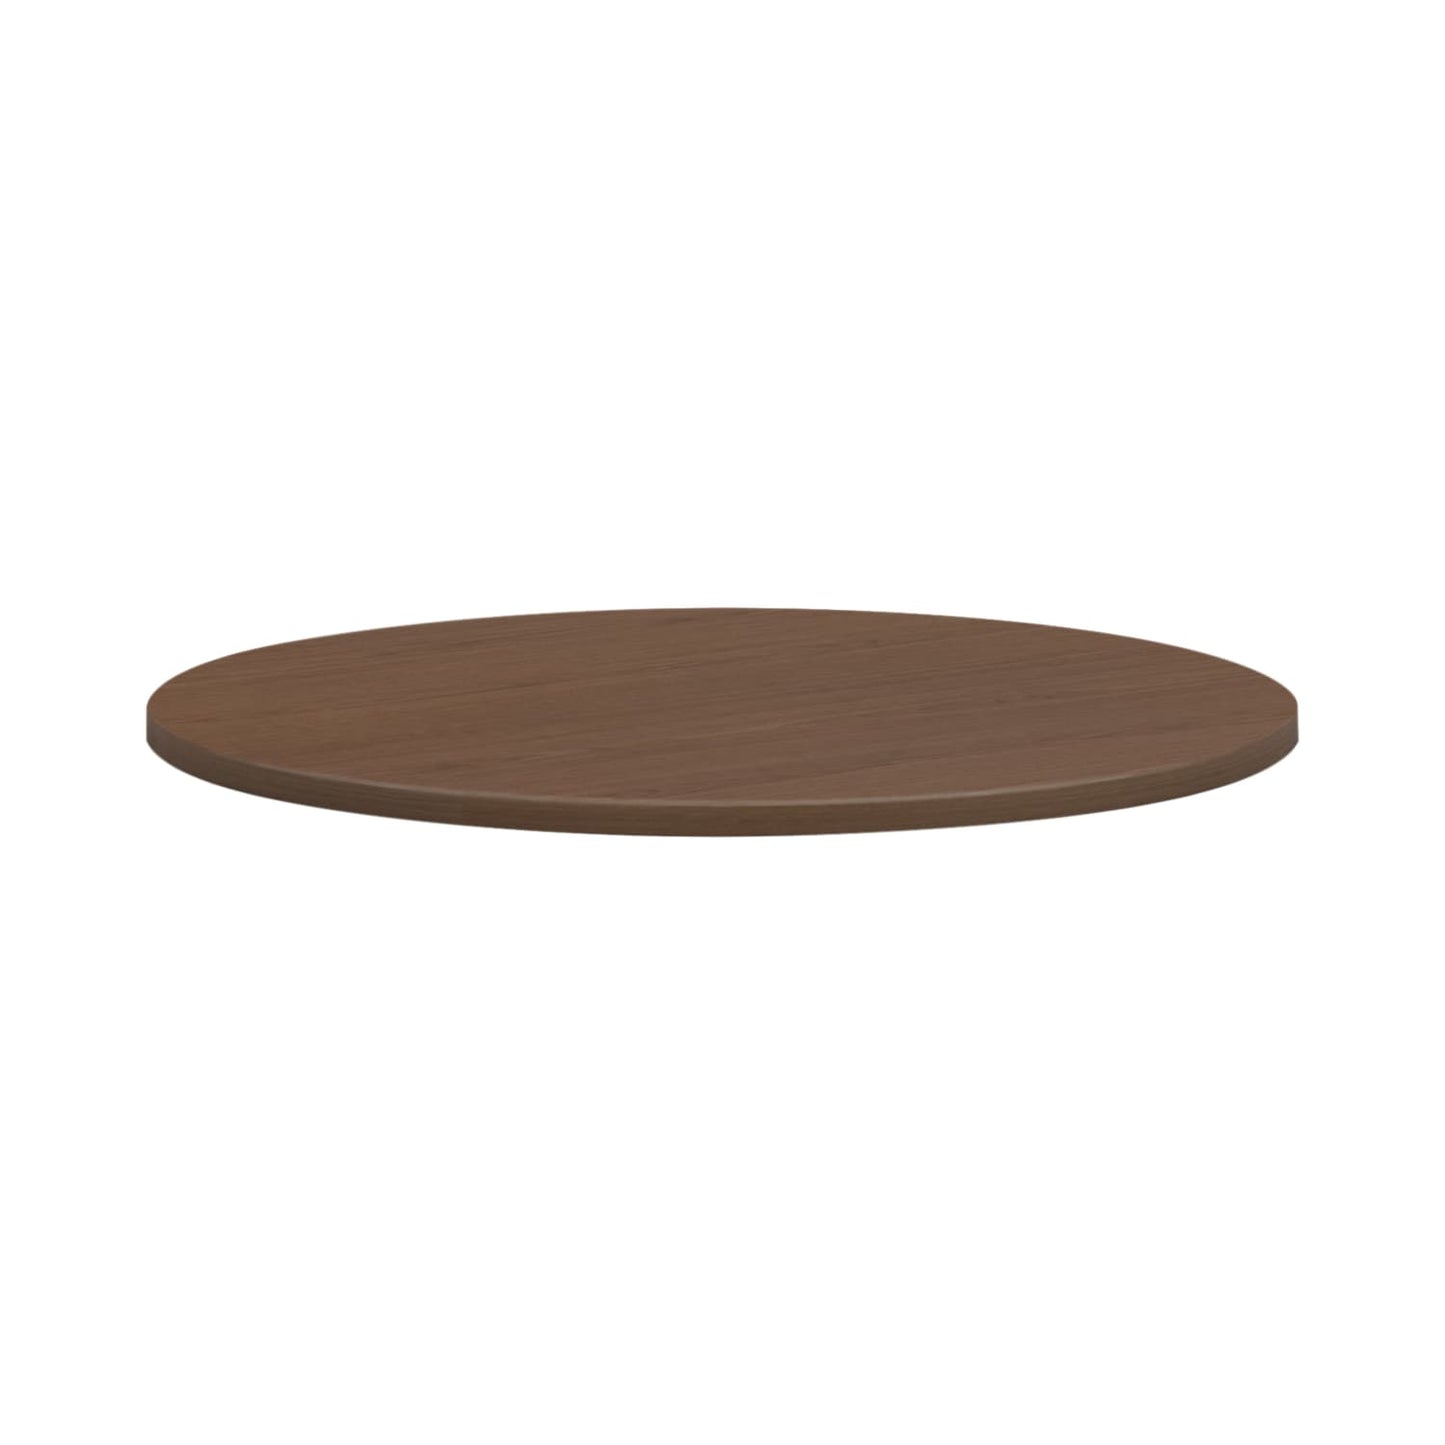 HON Mod Conference Table Top | Round | 36" Diameter | Sepia Walnut Finish